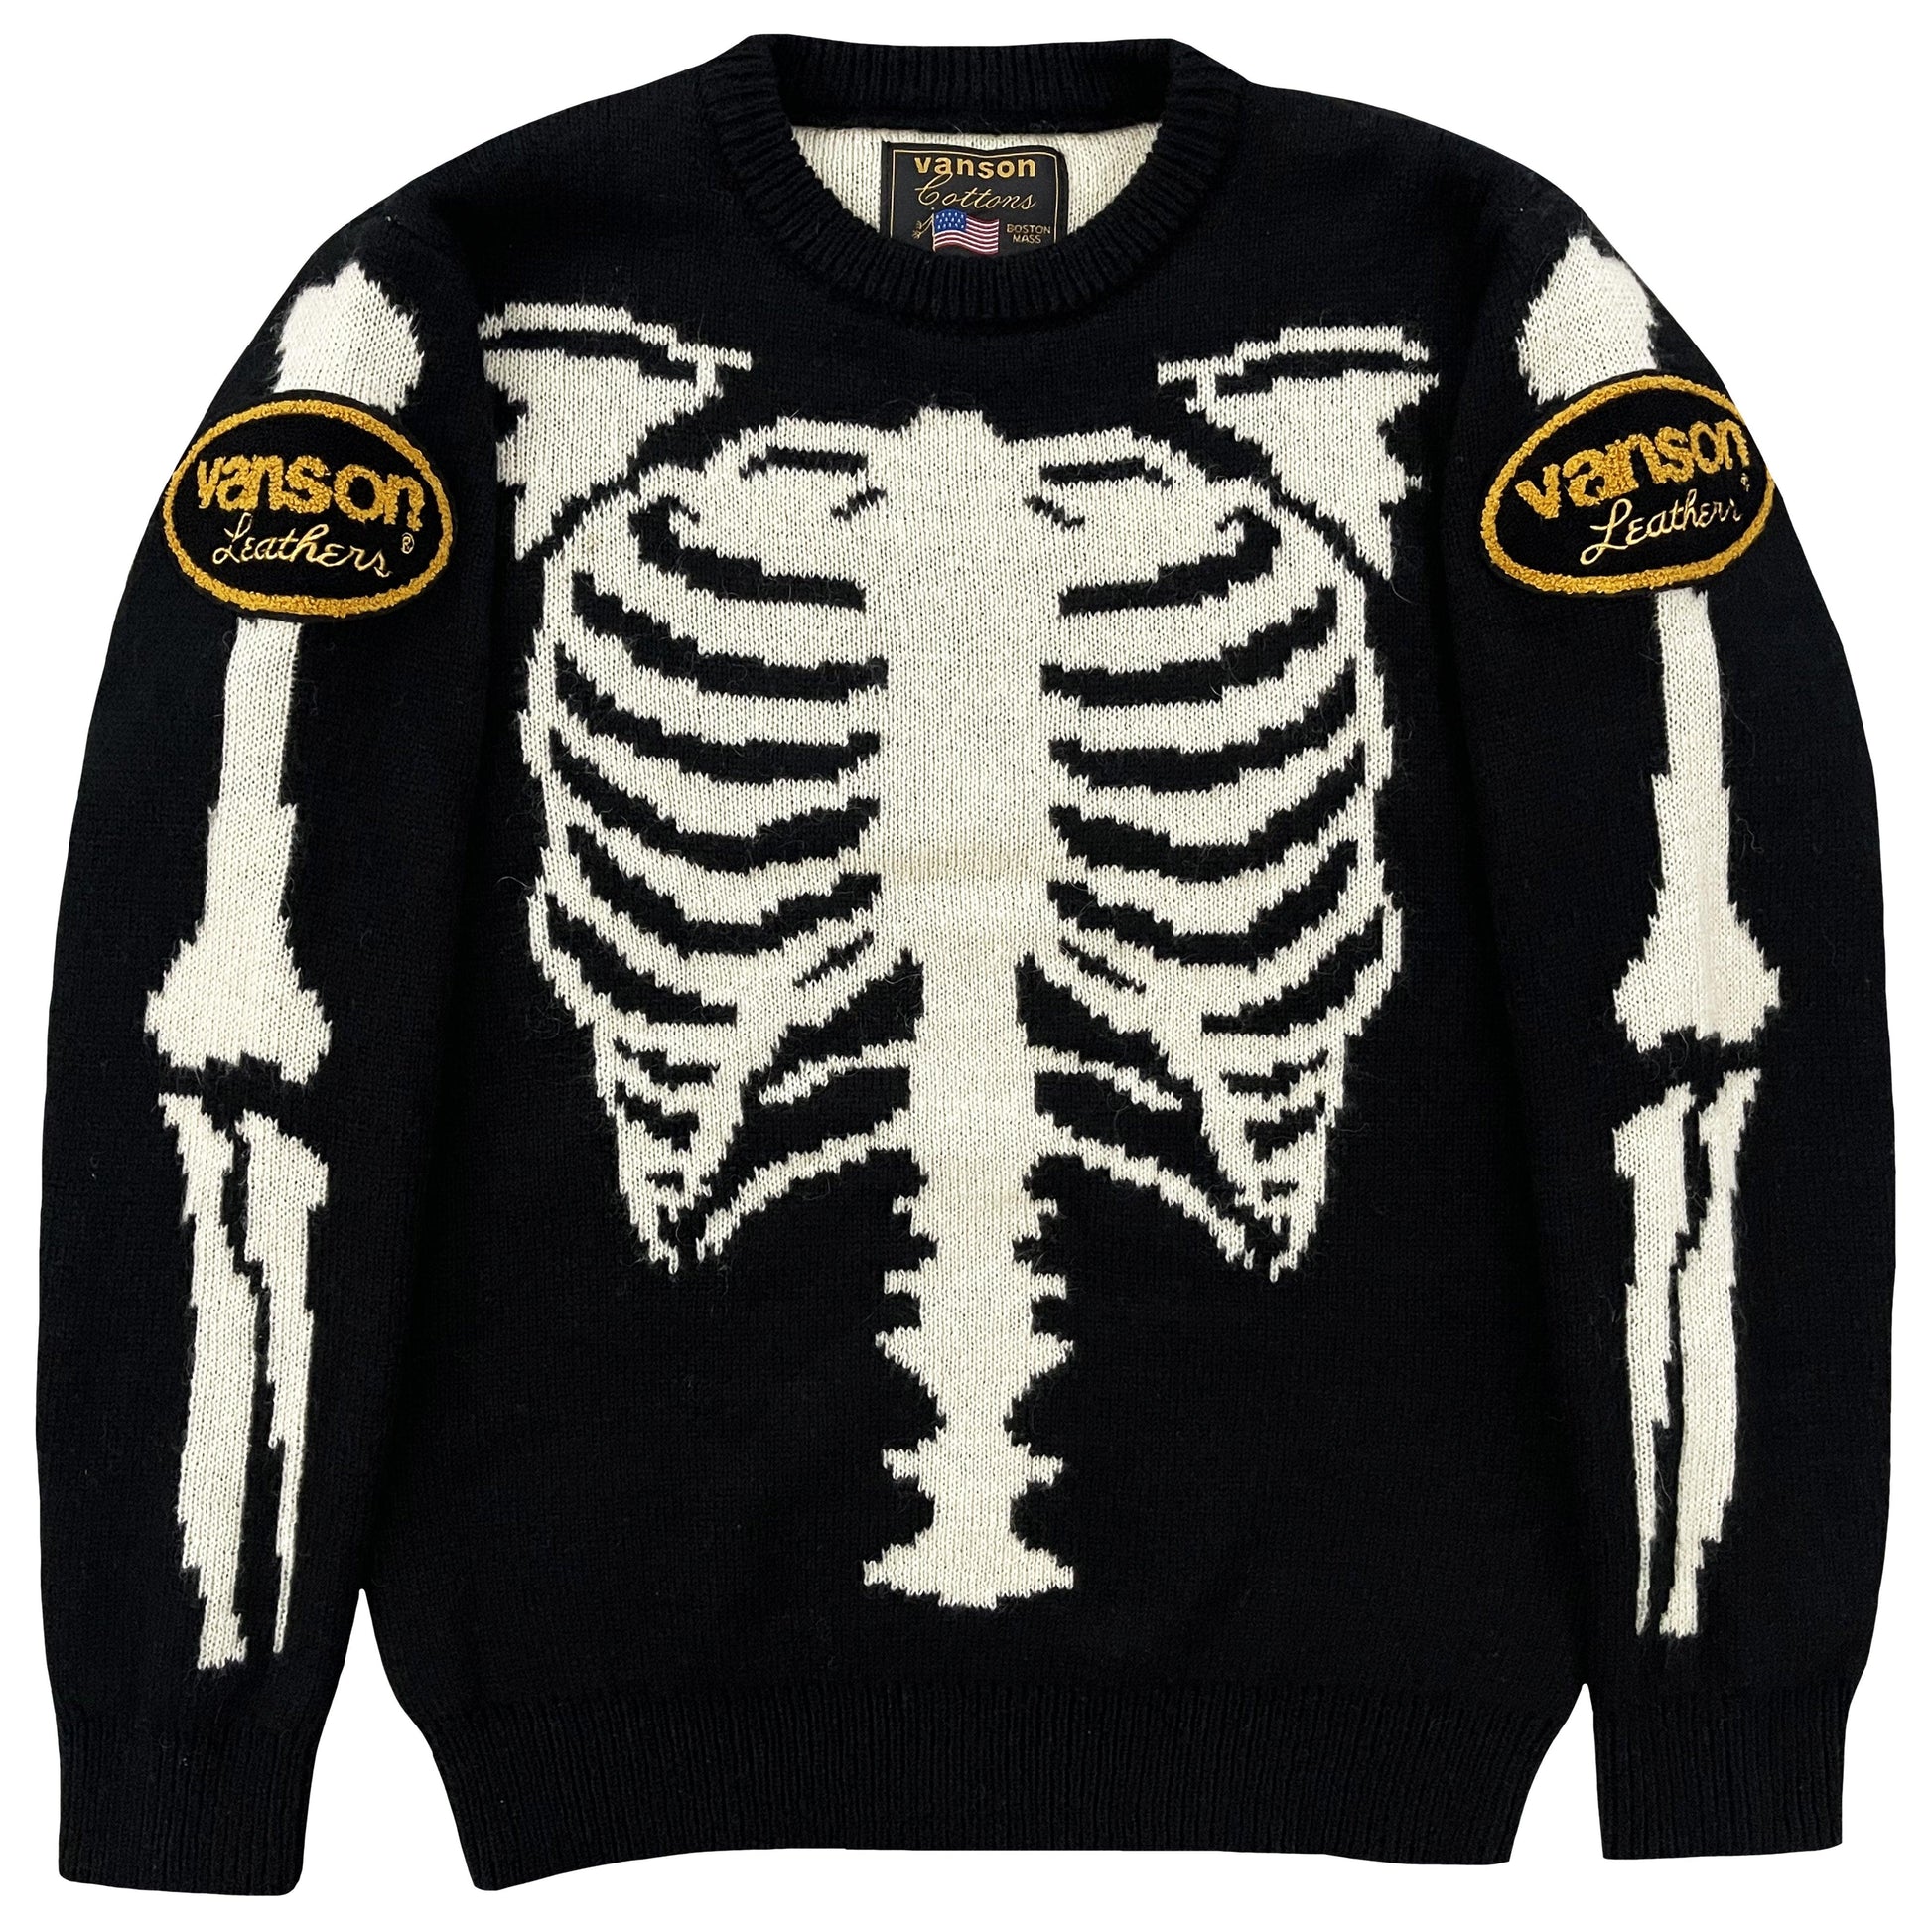 Vanson Leathers Mohair Skeleton Jumper - Known Source